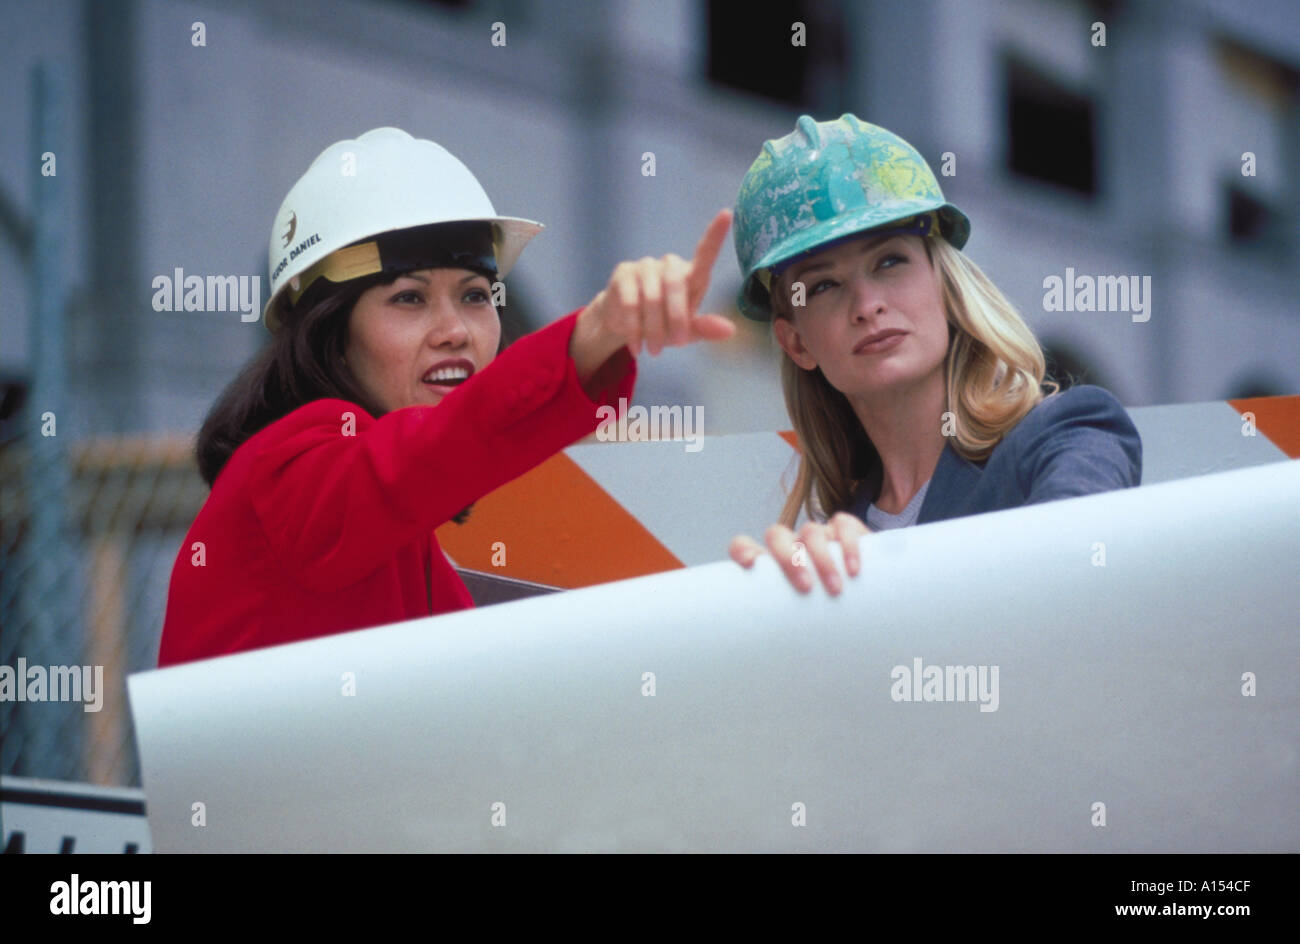 Two female architects holding blue prints and wearing hardhats while inspecting a work site Stock Photo